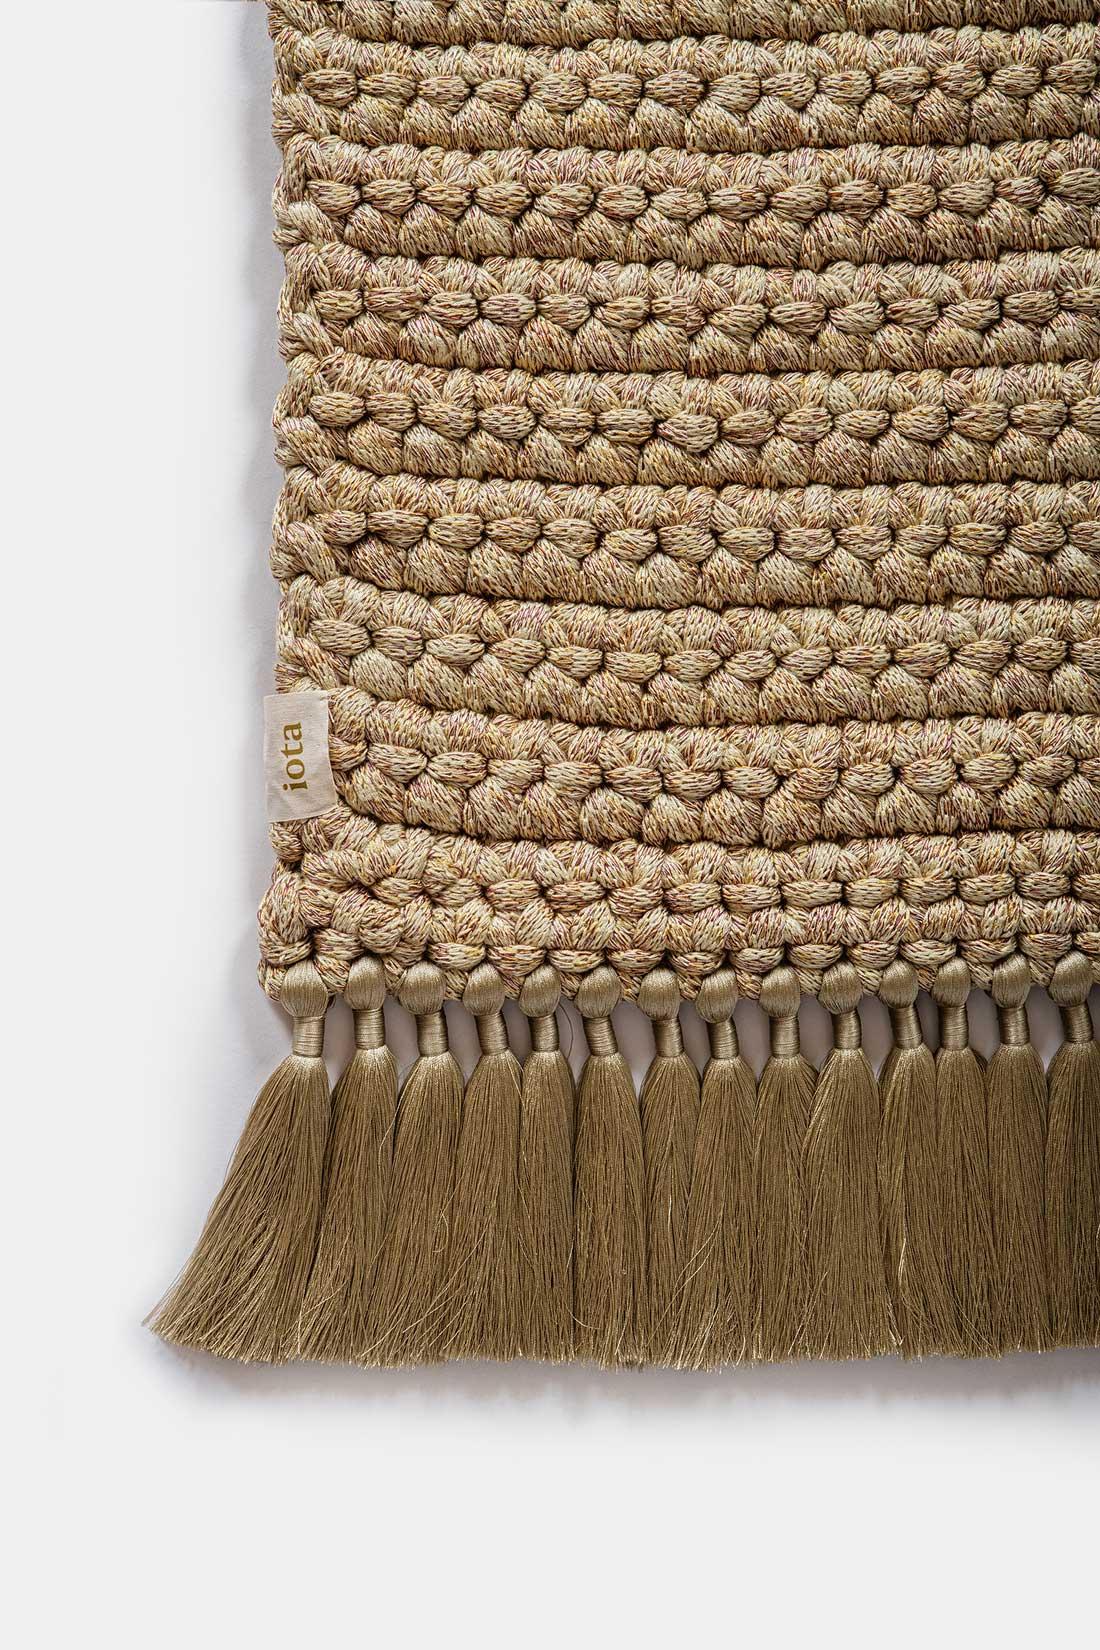 Israeli Handmade Crochet Thick Rug in Golden Beige Pink Made of Cotton & Polyester For Sale